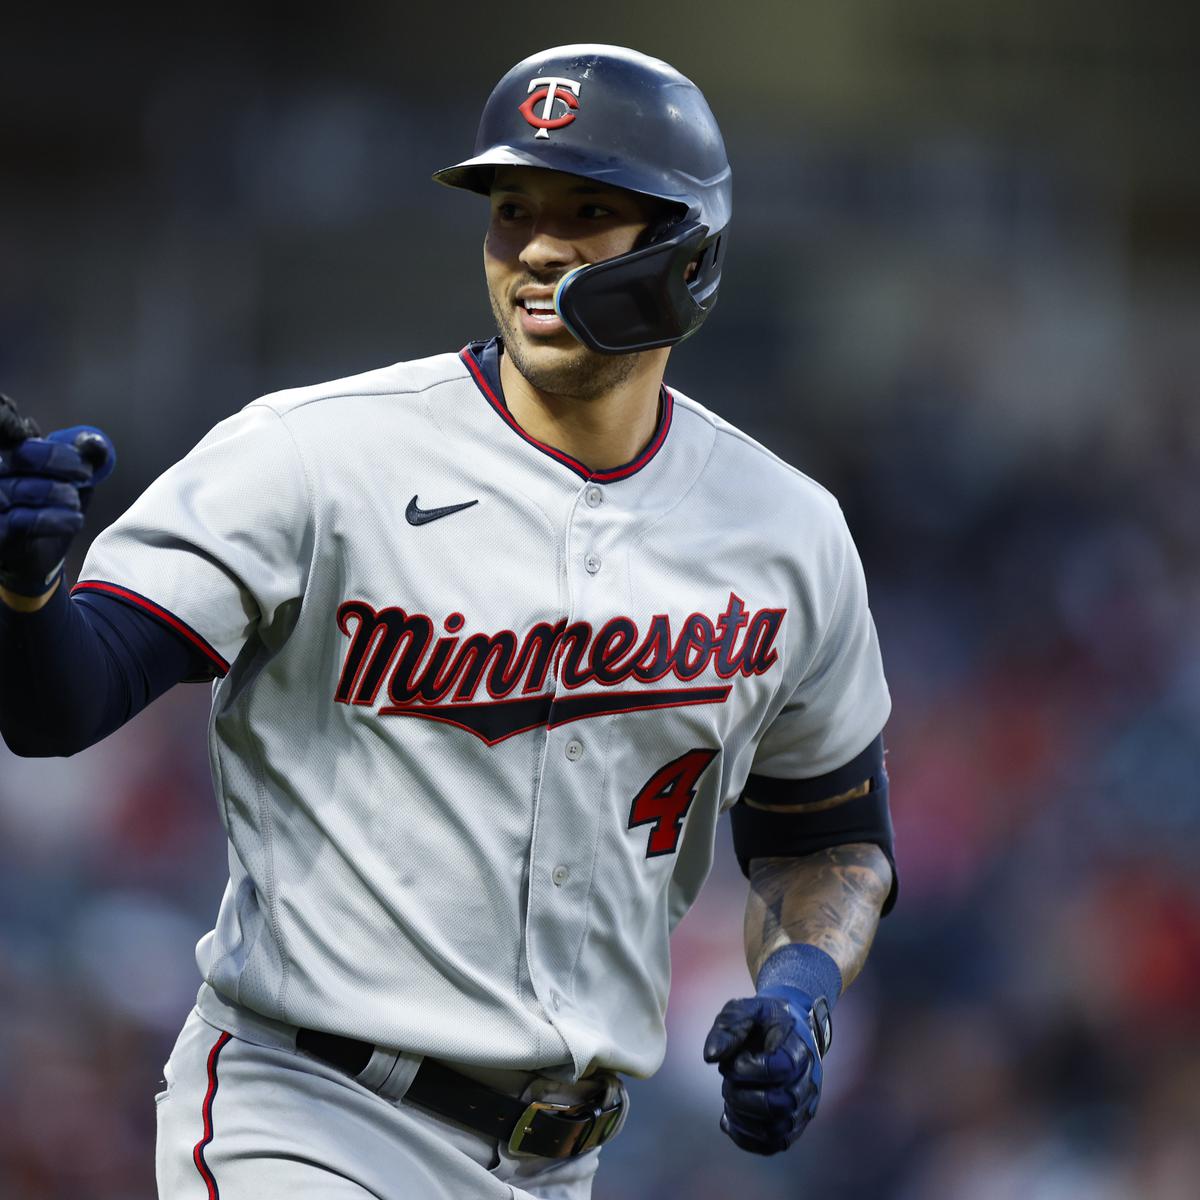 Carlos Correa opts out of Twins contract, becomes free agent - CBS Minnesota